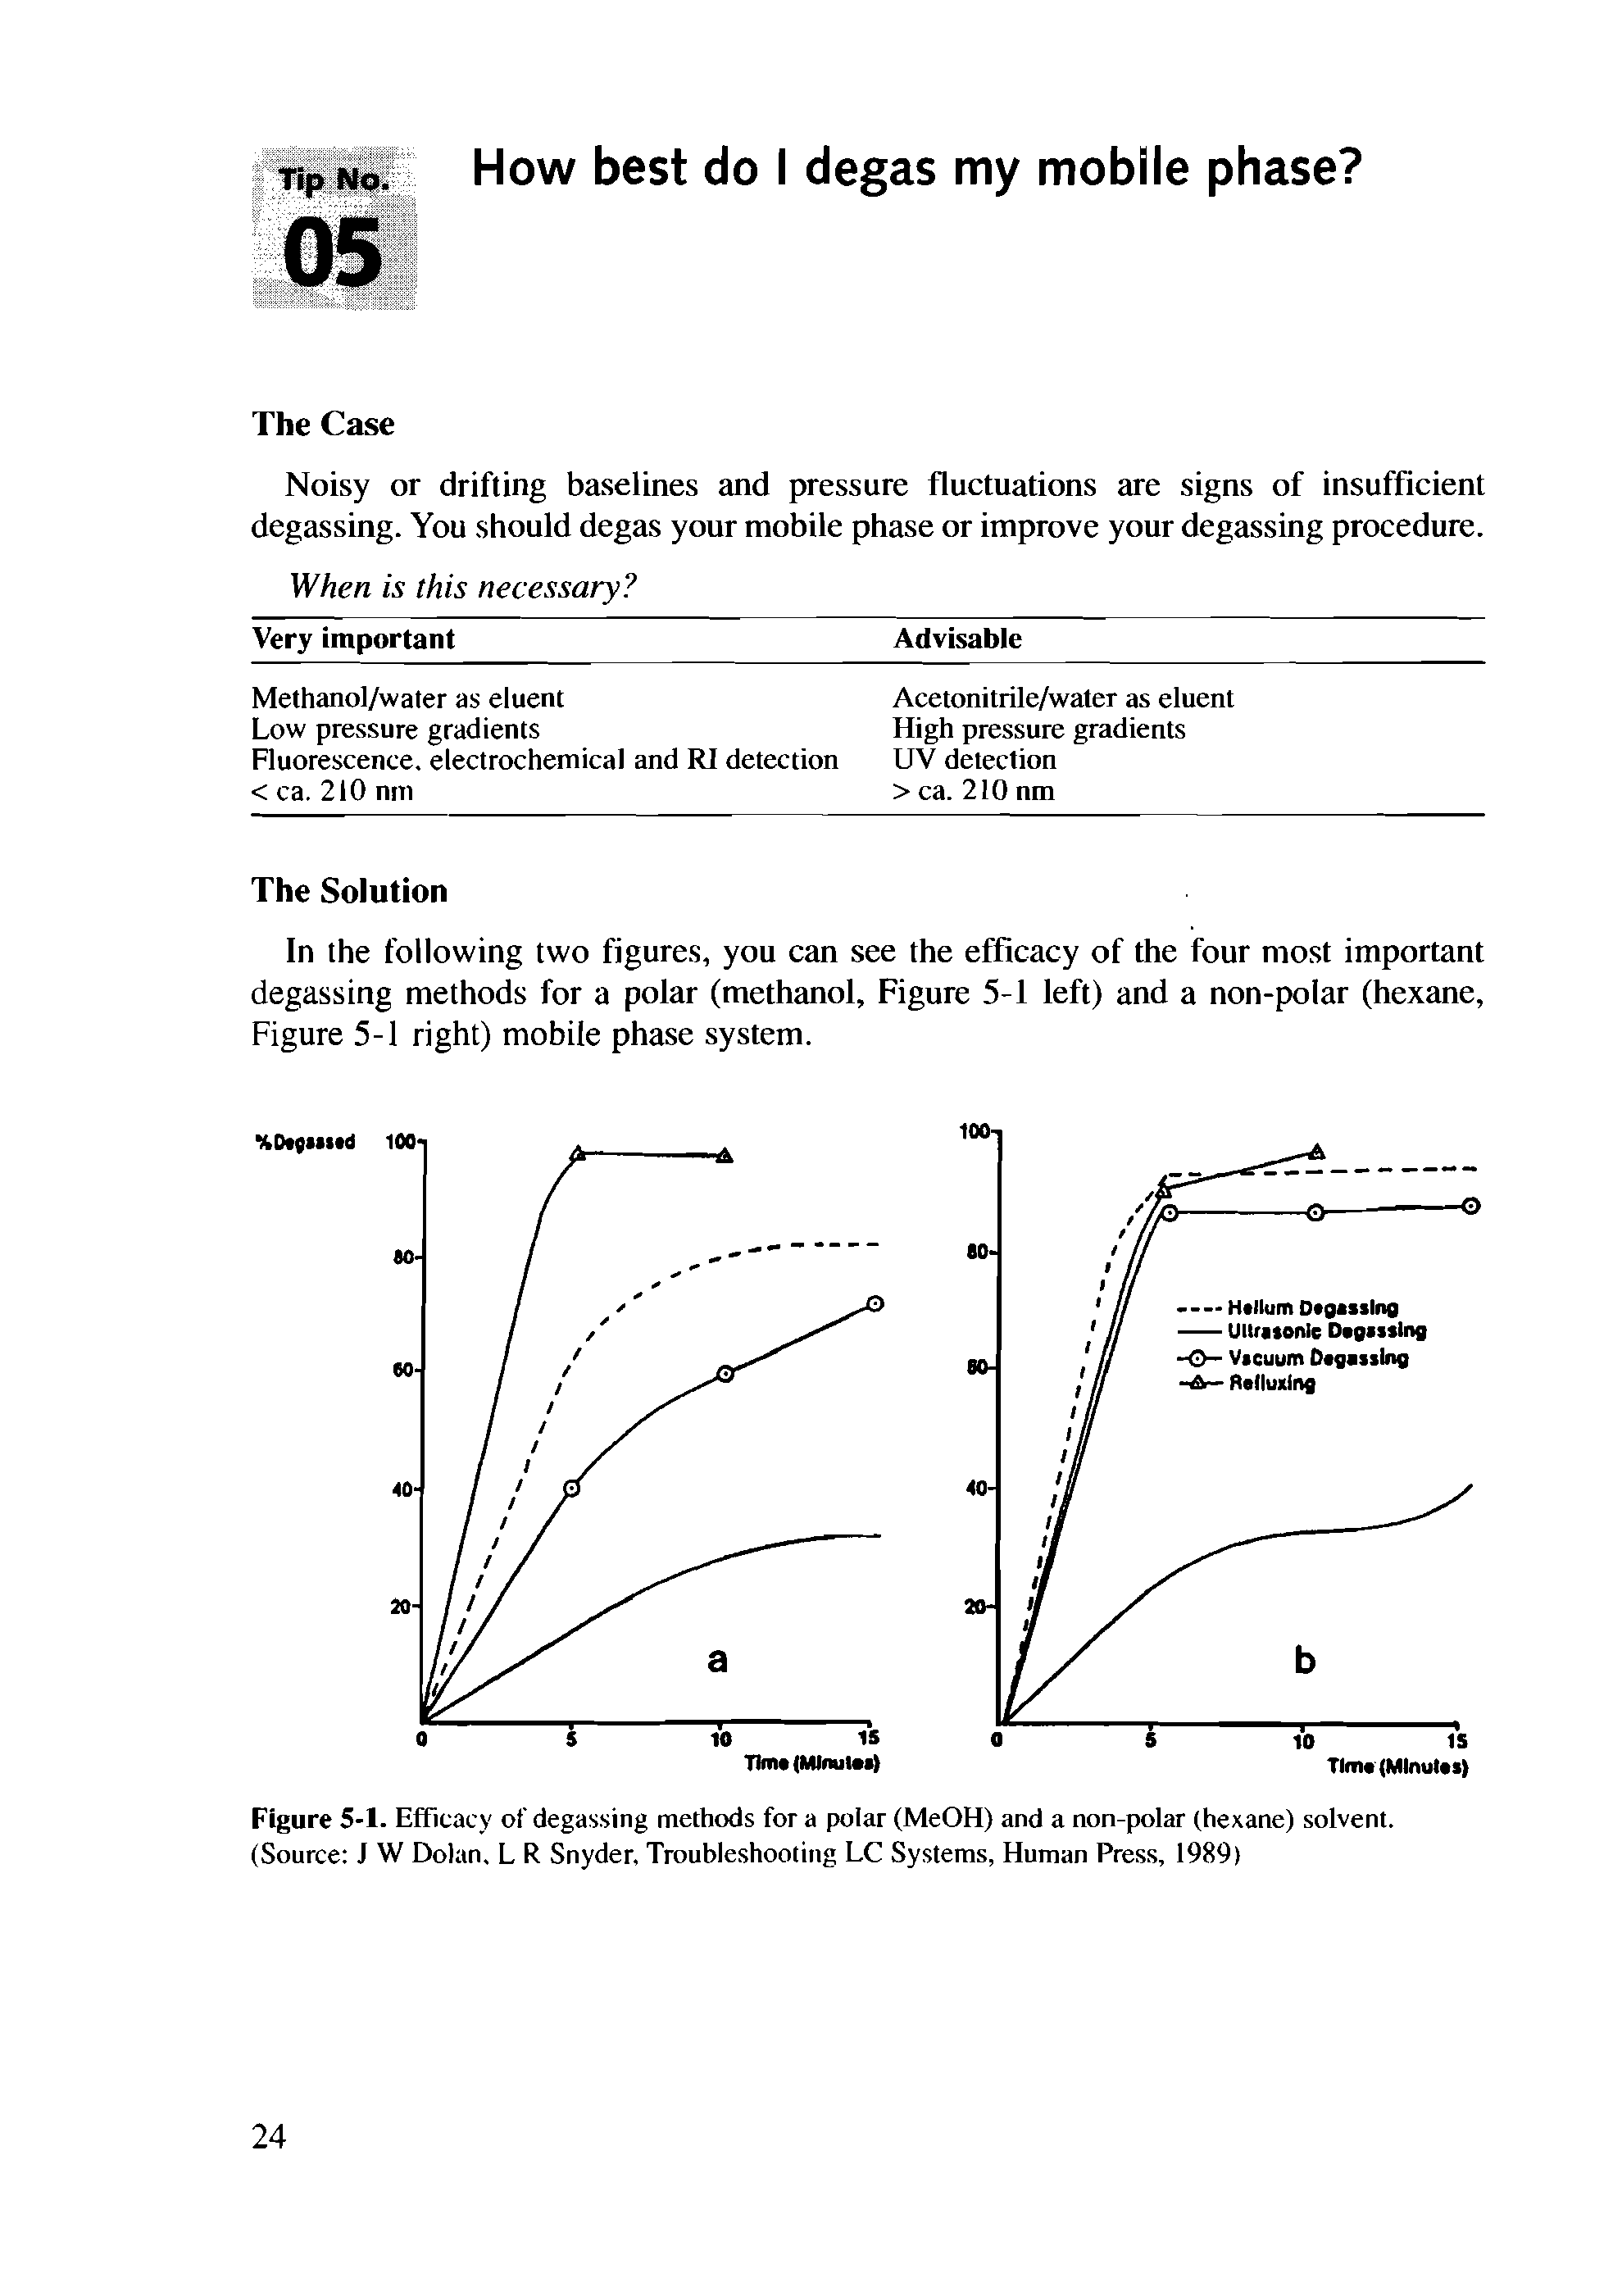 Figure 5-1. Efficacy of degassing methods for a polar (MeOH) and a non-polar (hexane) solvent. (Source J W Dolan, L R Snyder, Troubleshooting LC Systems, Human Press, 1989)...